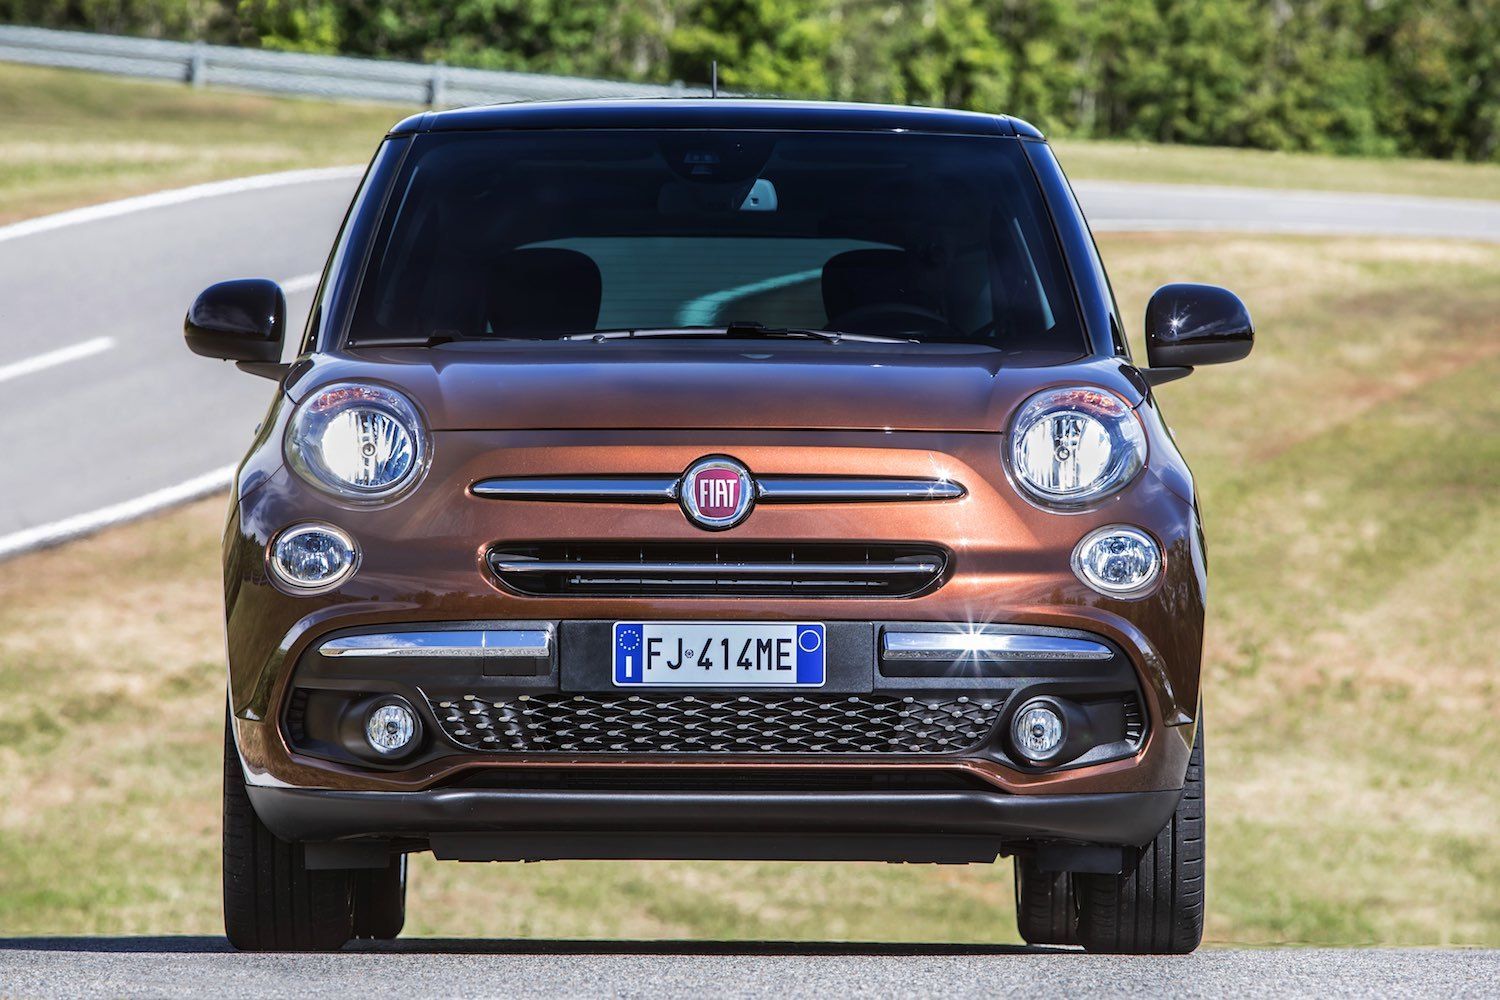 Tim Barnes-Clay reviews the New Fiat 500L from the first drive in Italy 6